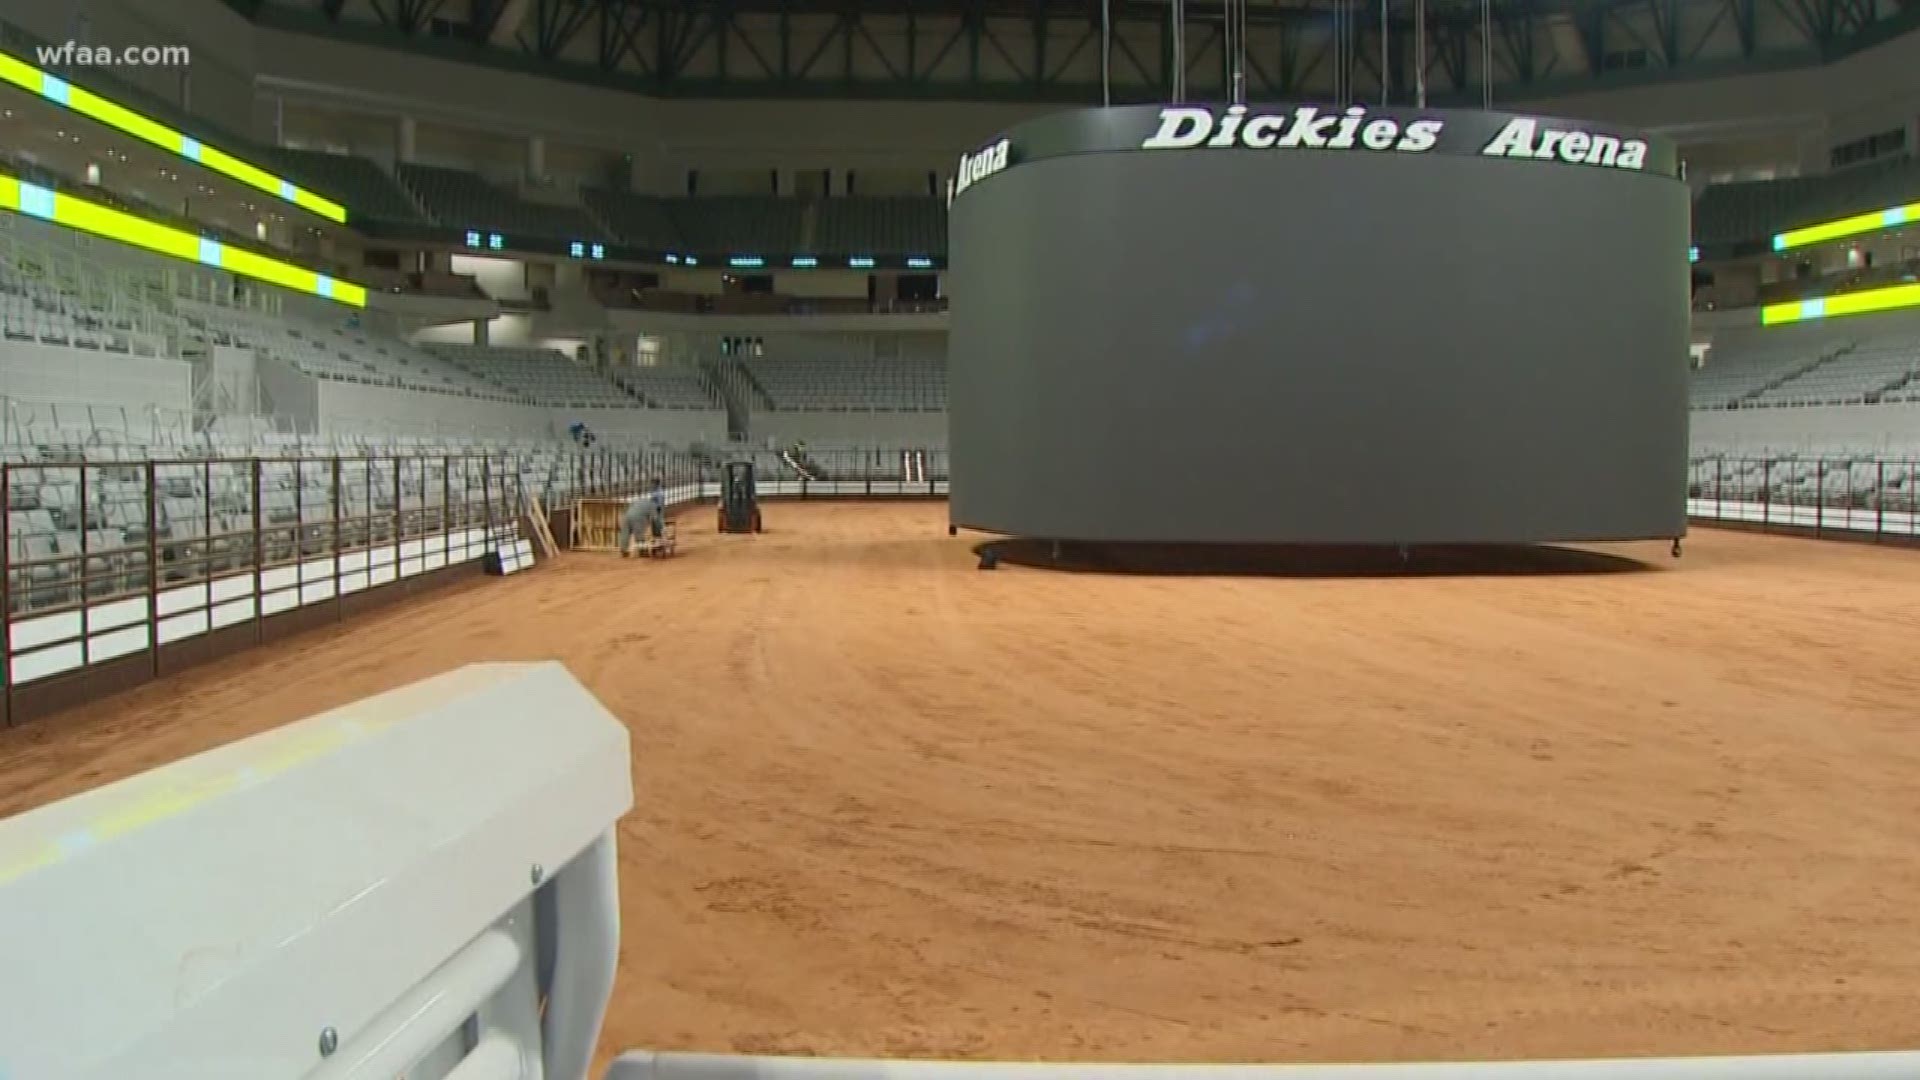 It’s the first time since 1944 the rodeo hasn’t been held at adjacent Will Rogers Coliseum.